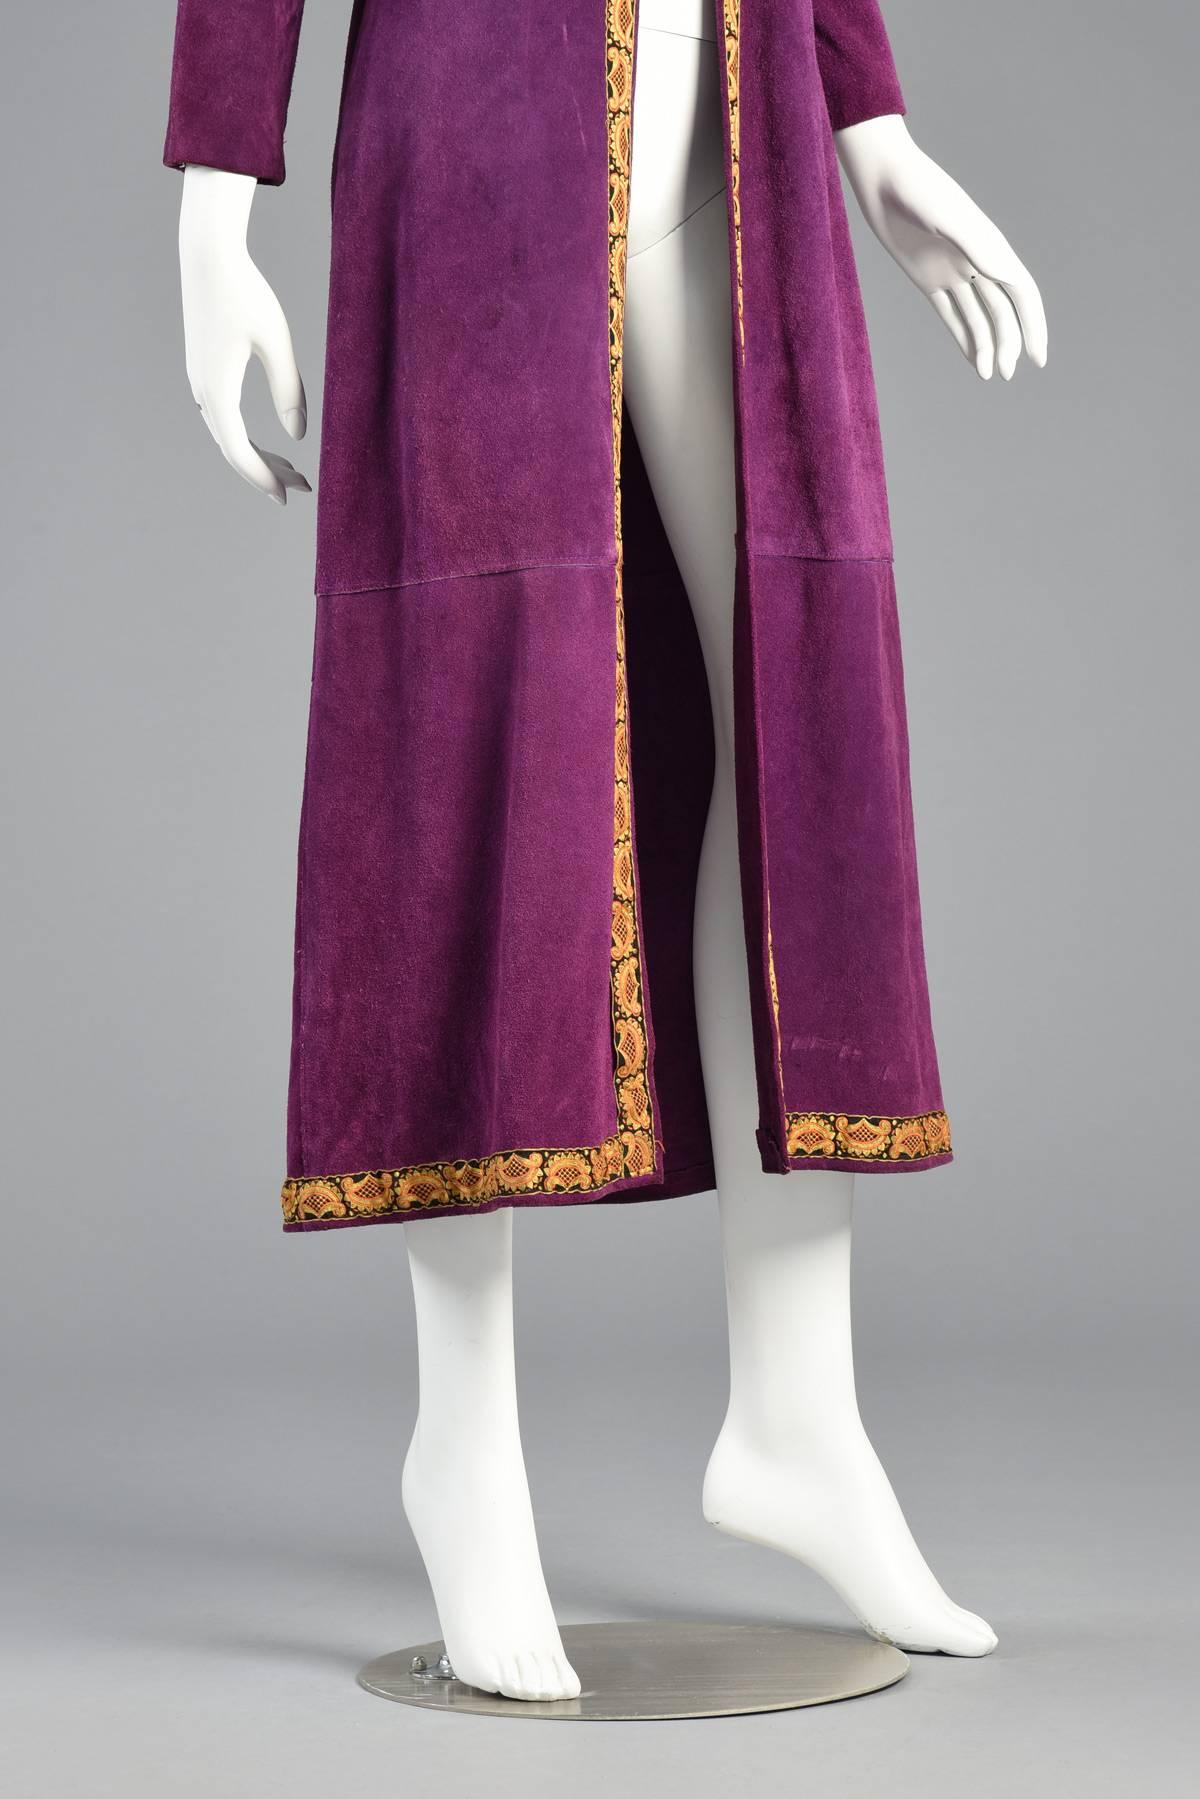 1960s Bohemian Purple Suede Hooded Jacket with Tapestry Trim For Sale 5